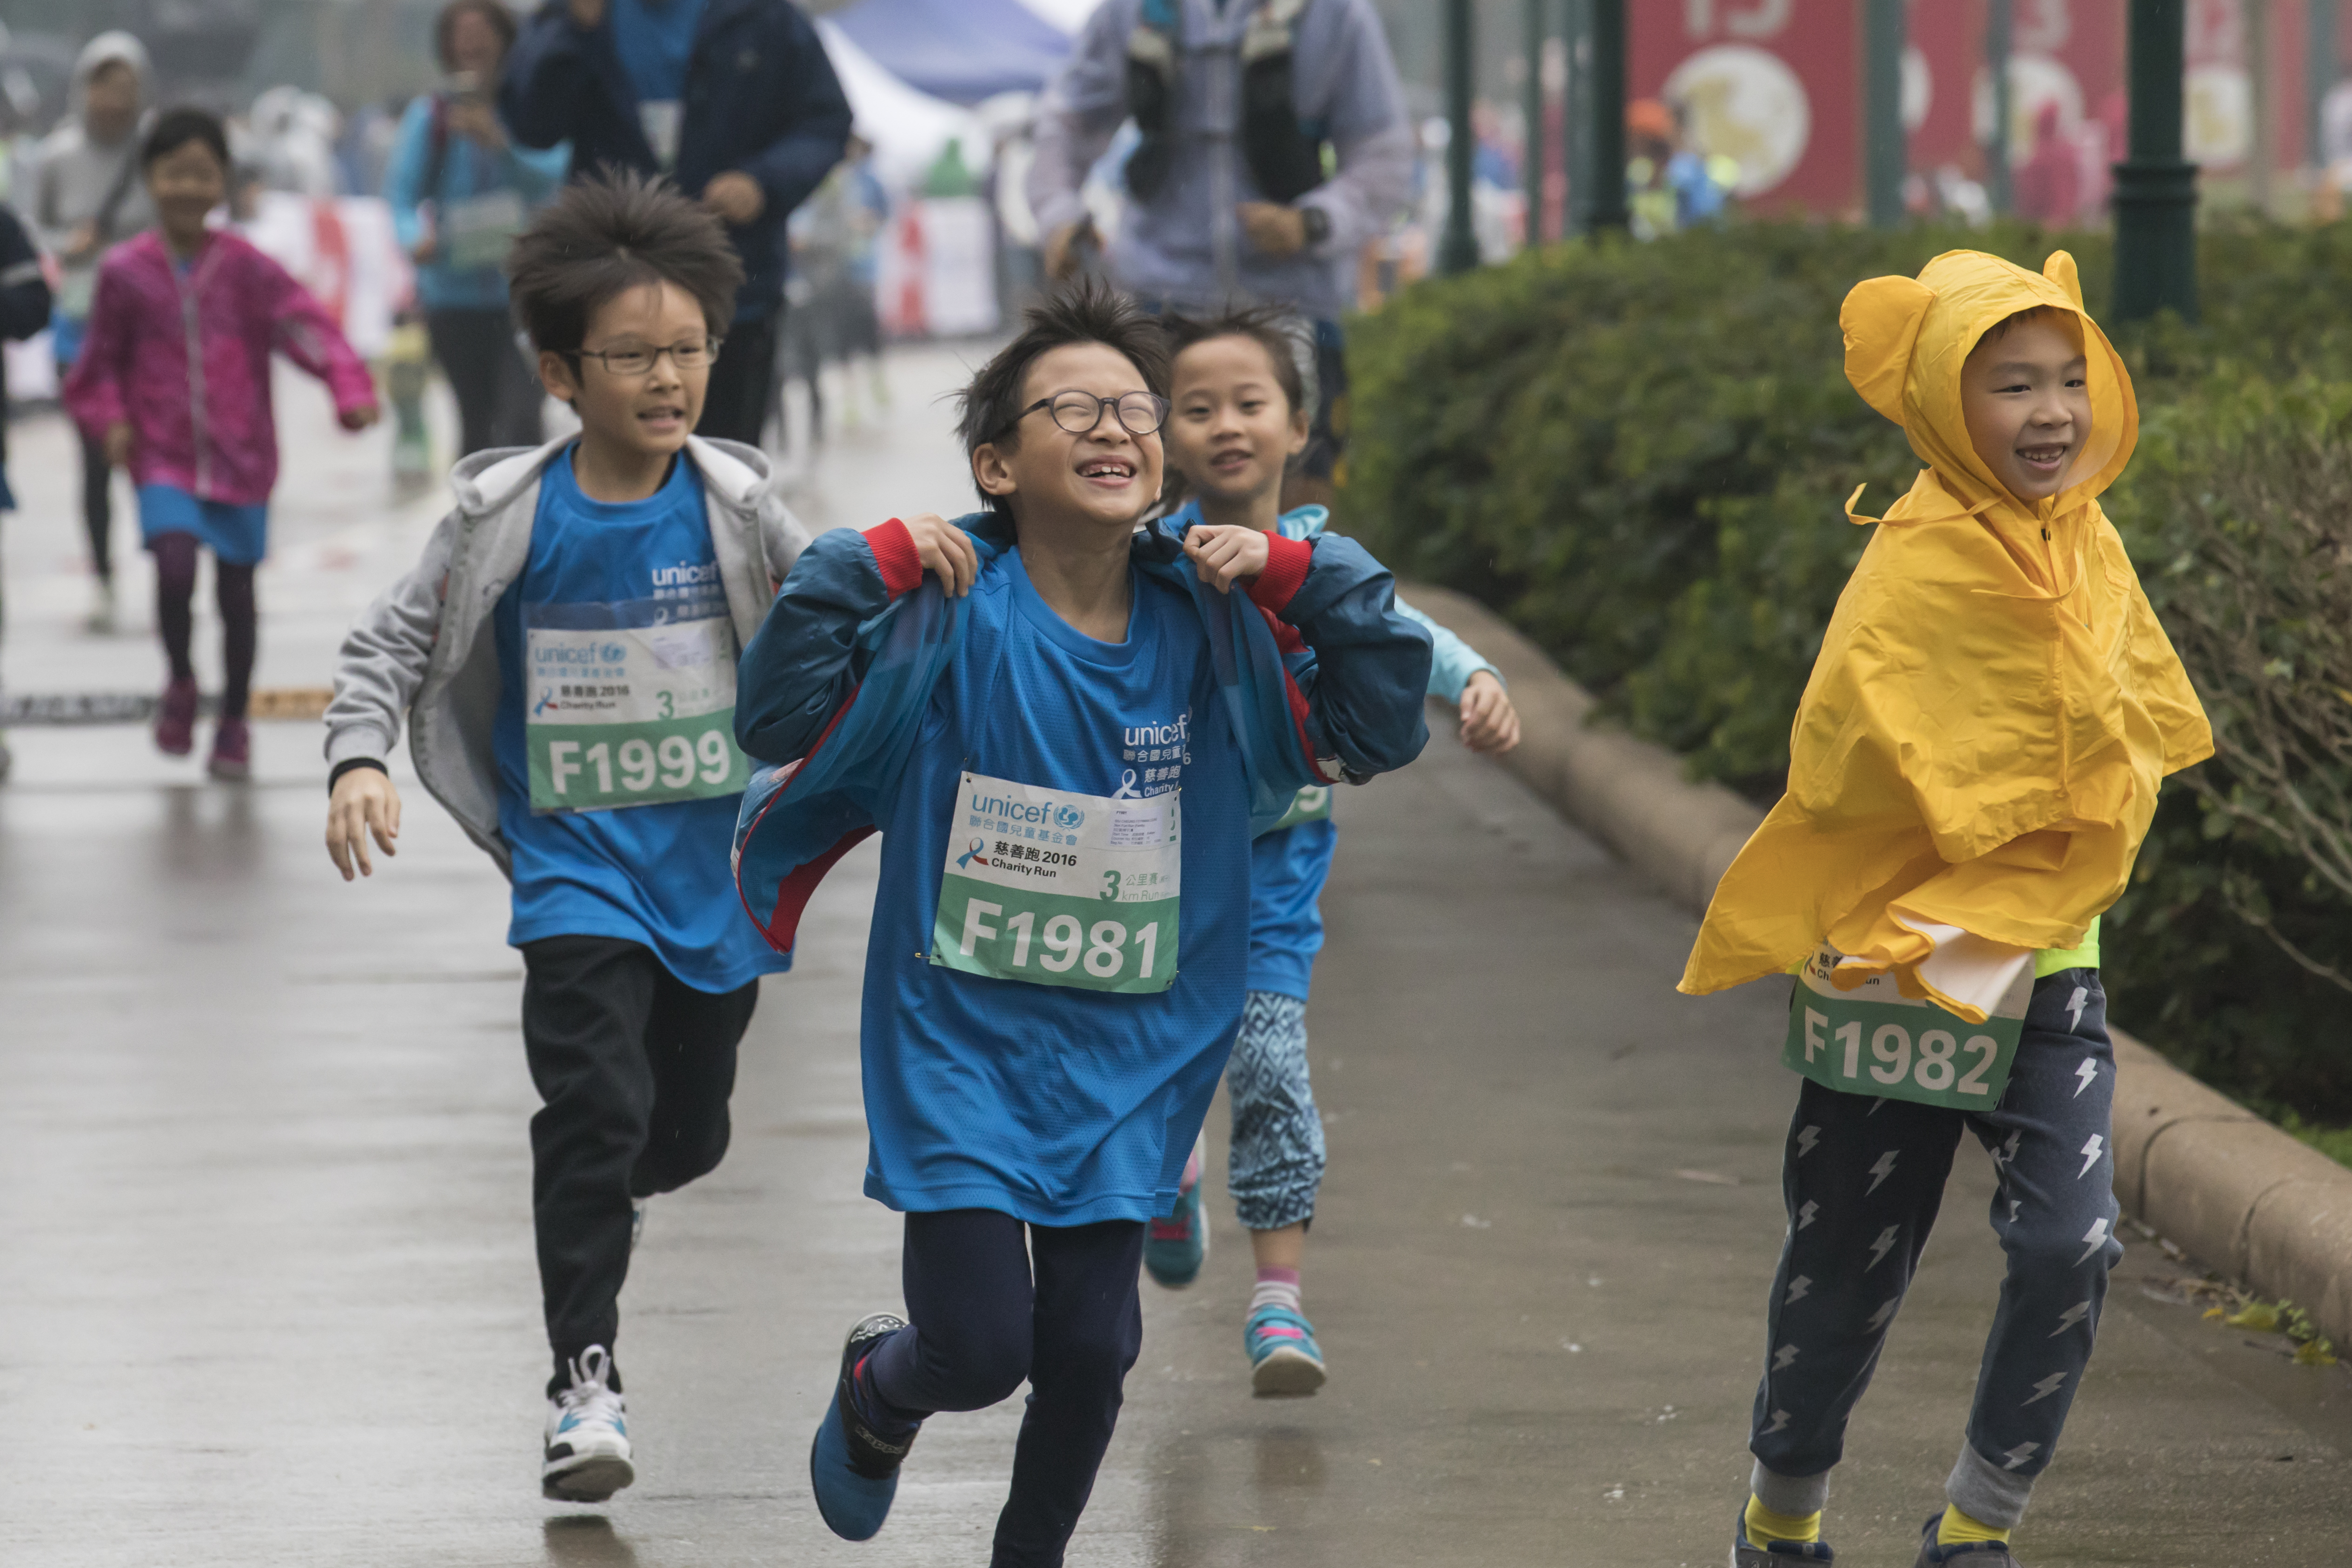 UNICEF Charity Run 2017 Aims to Run for Every Child Introducing the First Star Wars™ 5km Run in ...